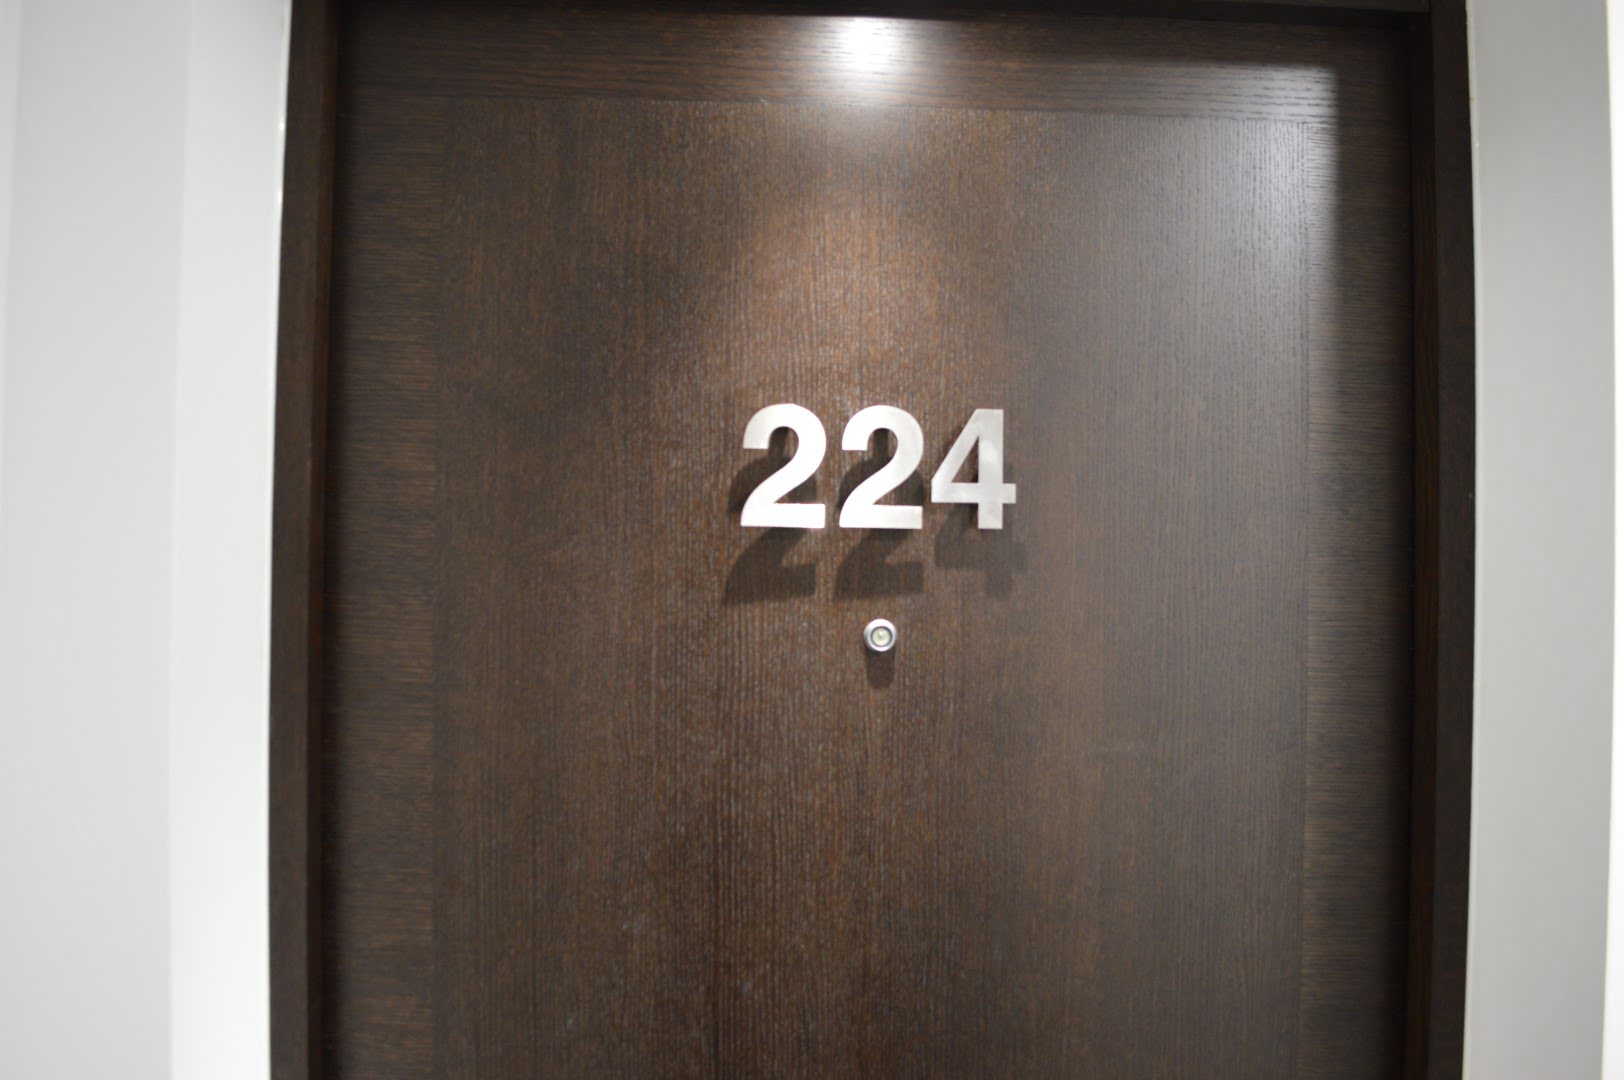 This is a dark wooden door with the number 224 in silver, raised numerals. There's a peephole and a light shadow cast on the surface.